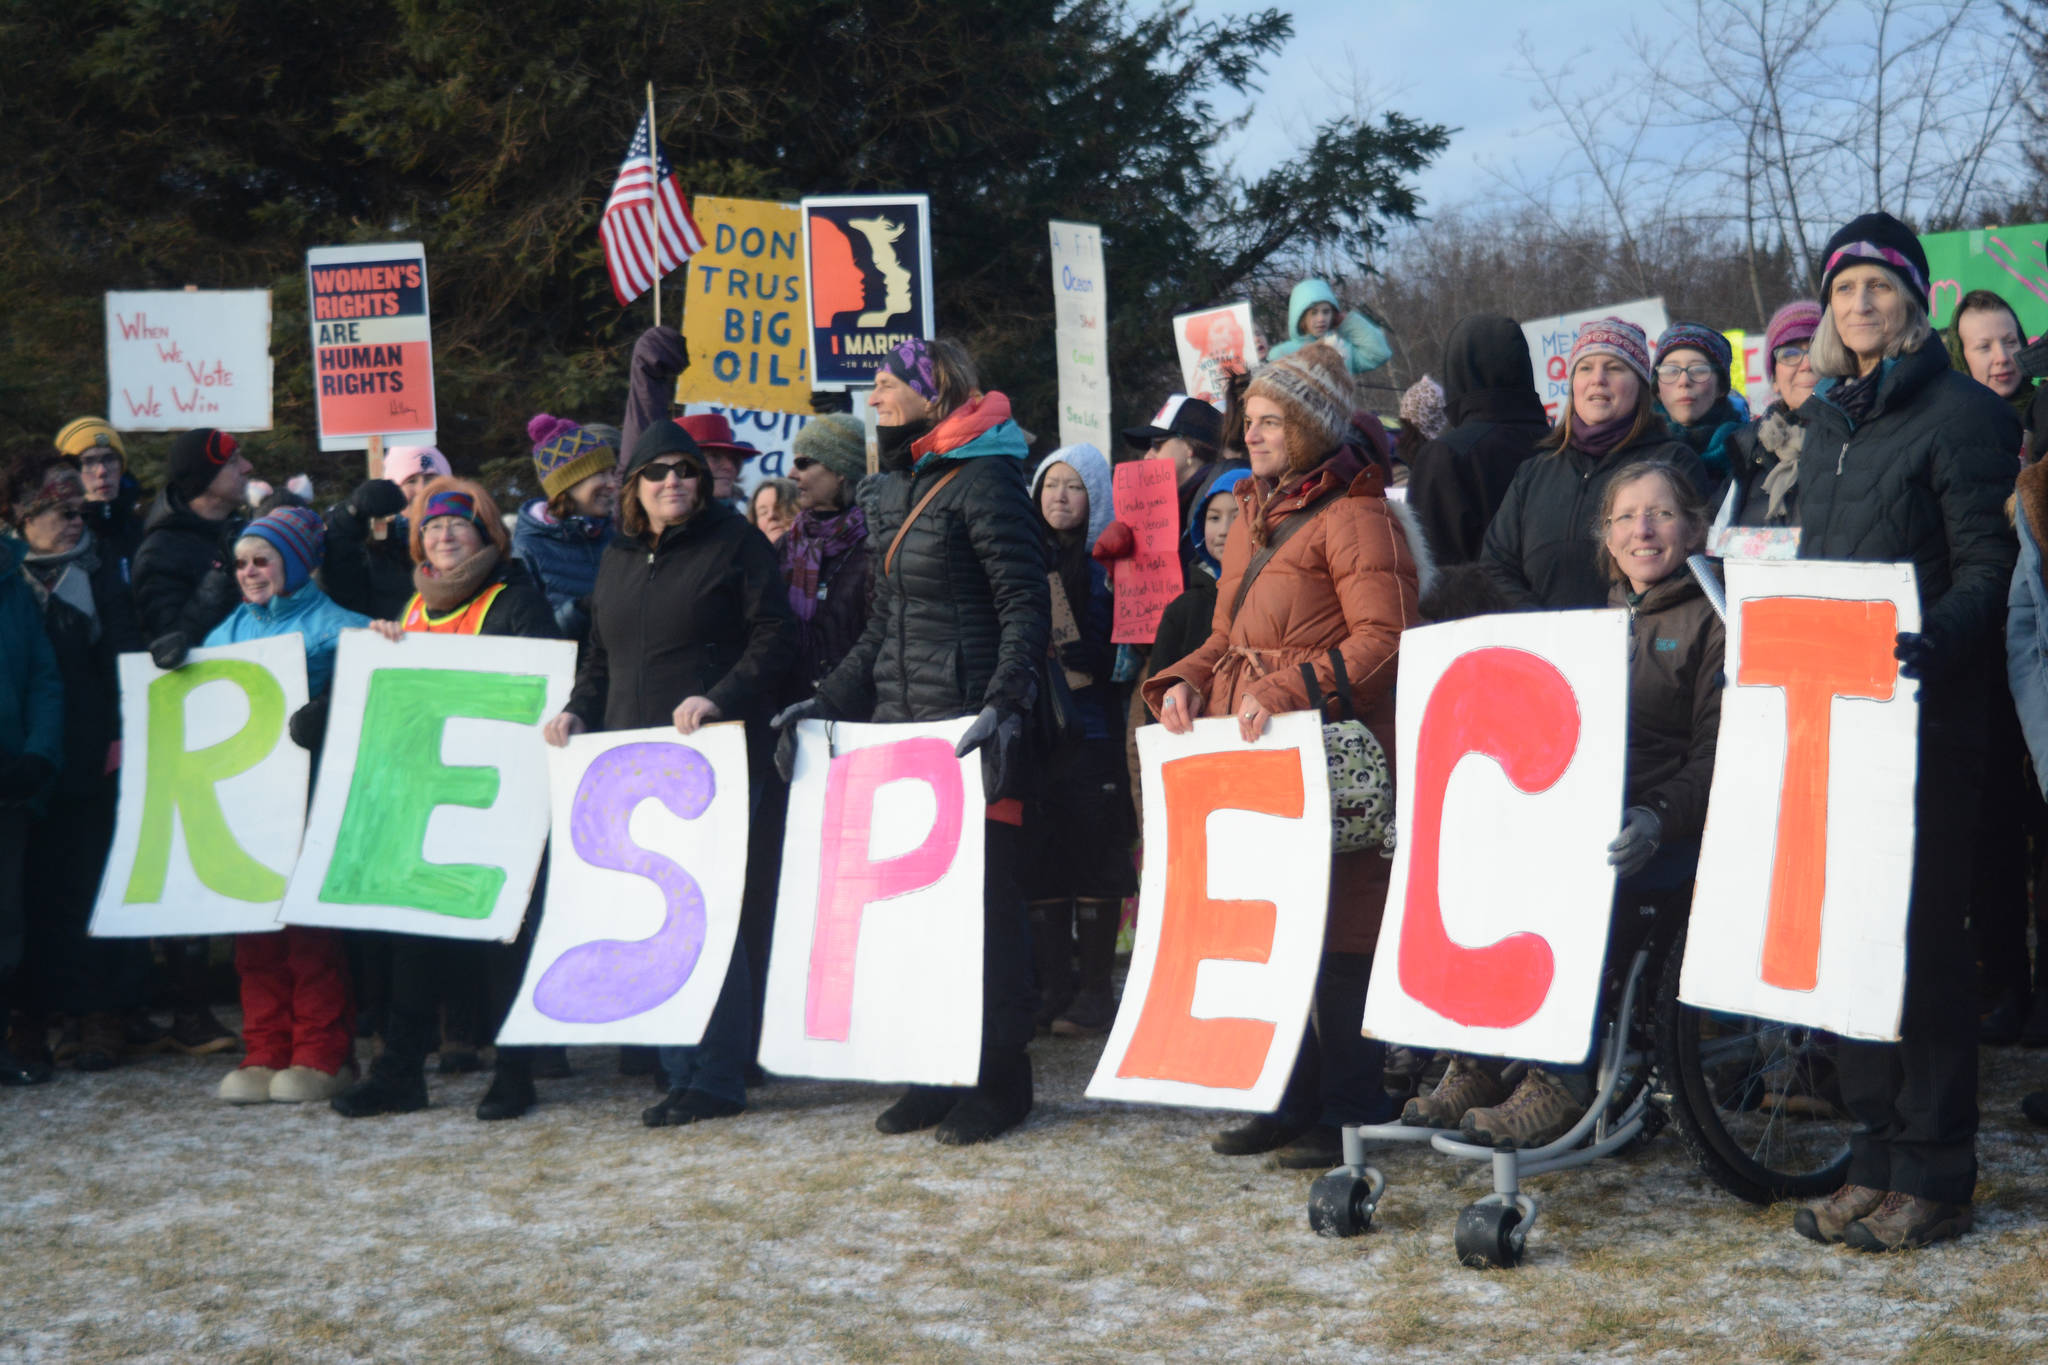 Participants hold up letters that spell out ‘RESPECT” at WKFL Park at the end of the Homer March for Women on Saturday. About 700 people walked in the march along Pioneer Avenue on Jan. 20, 2018, in Homer, Alaska. The line of marchers extended from Main Street to Kachemak Way. (Photo by Michael Armstrong/Homer News)